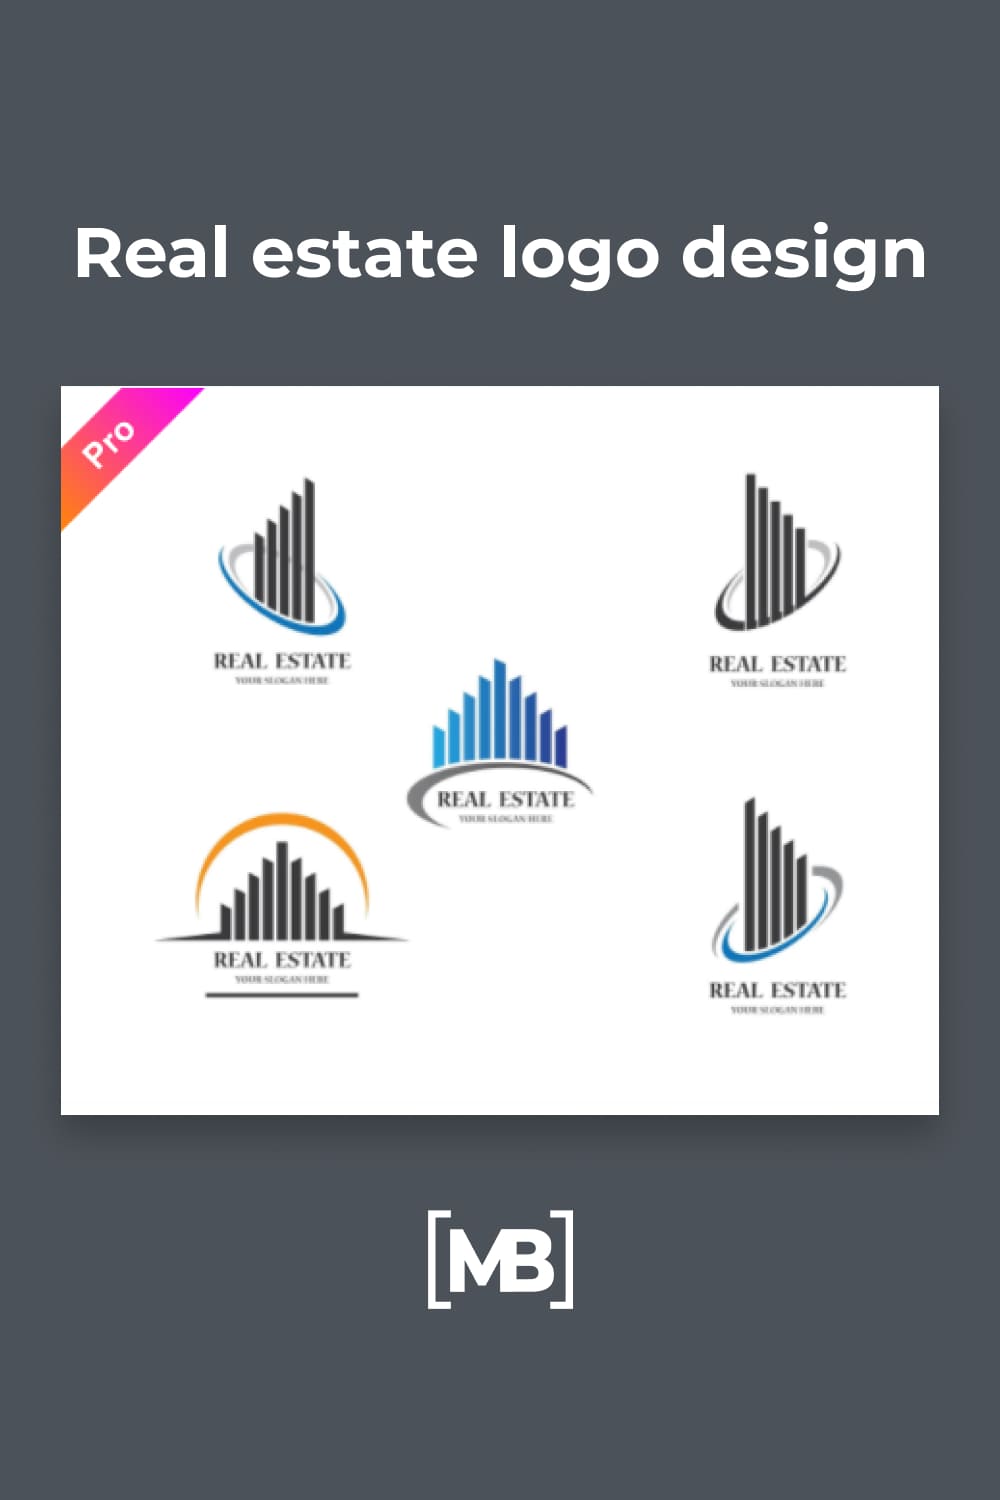 Real estate logo design with different illustrations.